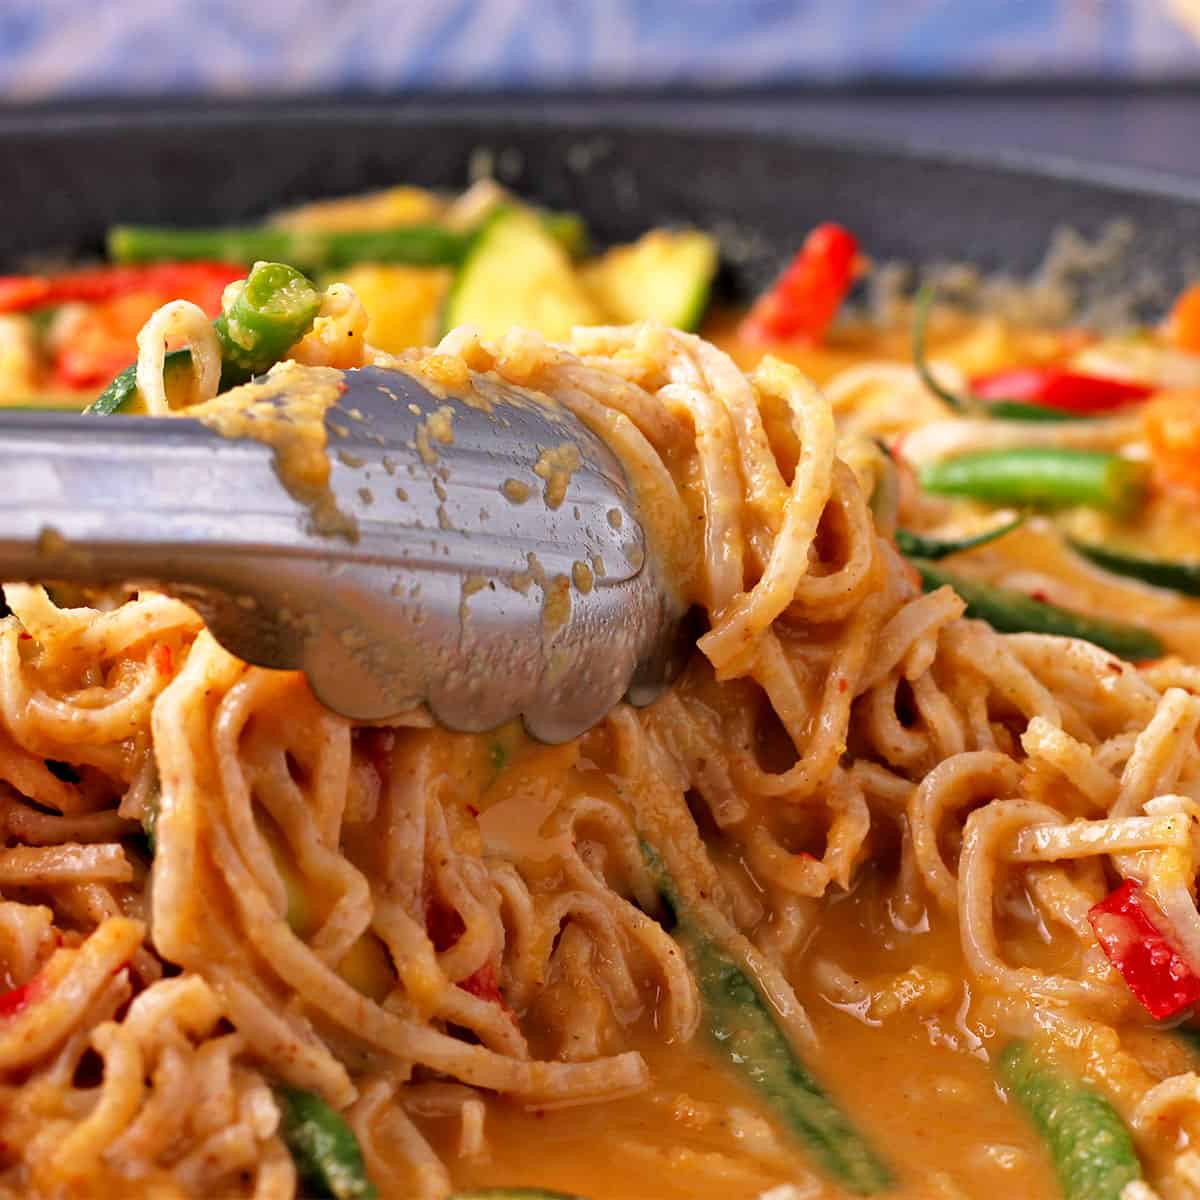 Noodles are stirred into a bowl of vegetable mango curry.